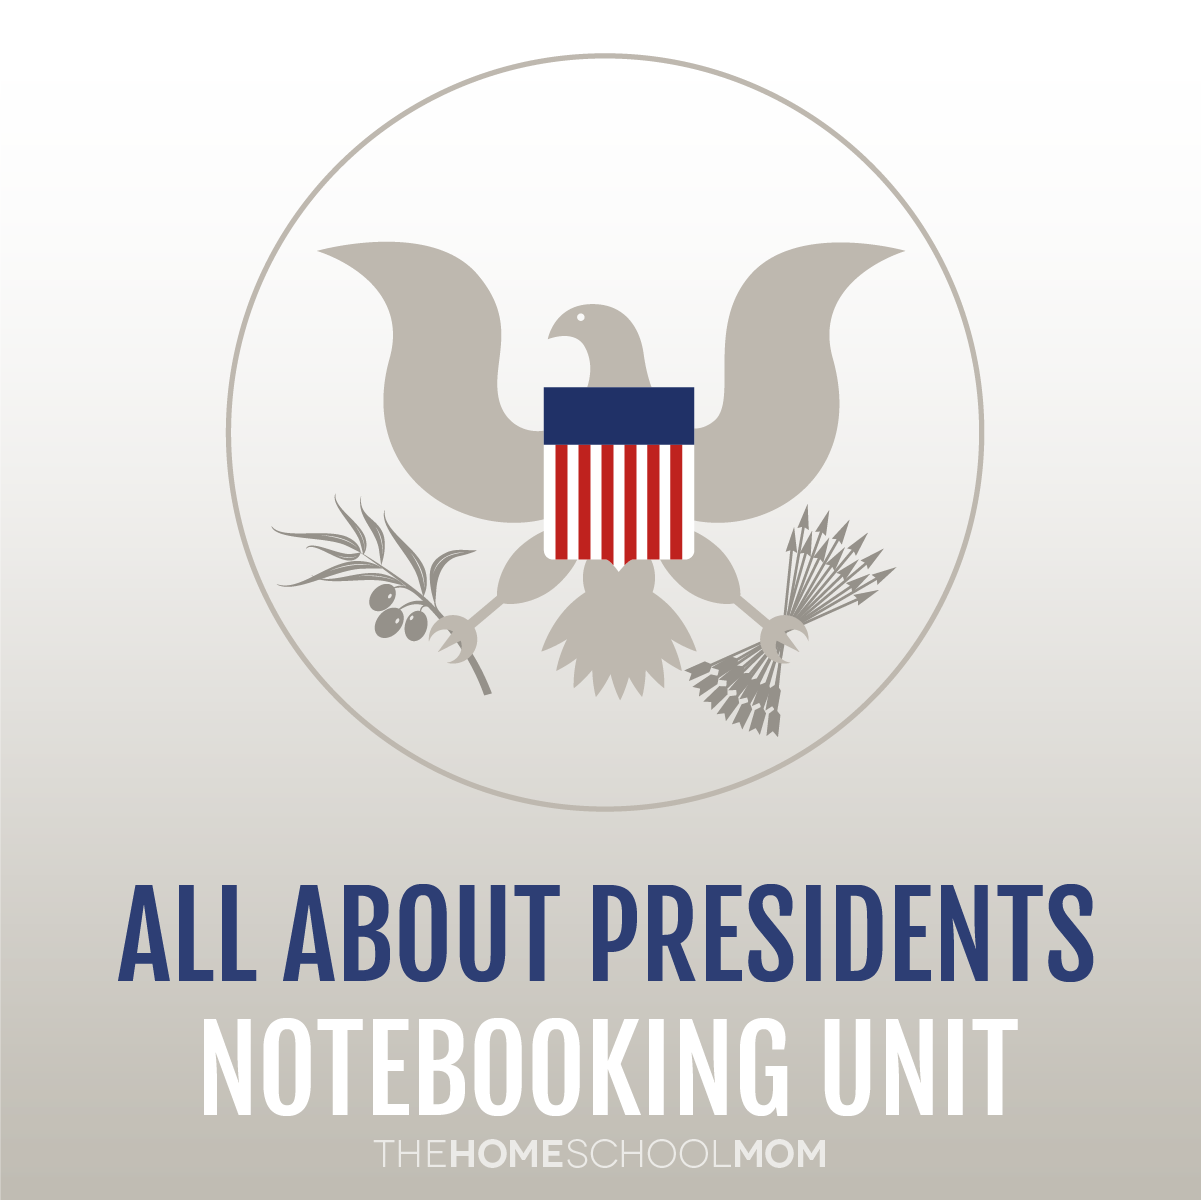 All About Presidents Notebooking Unit